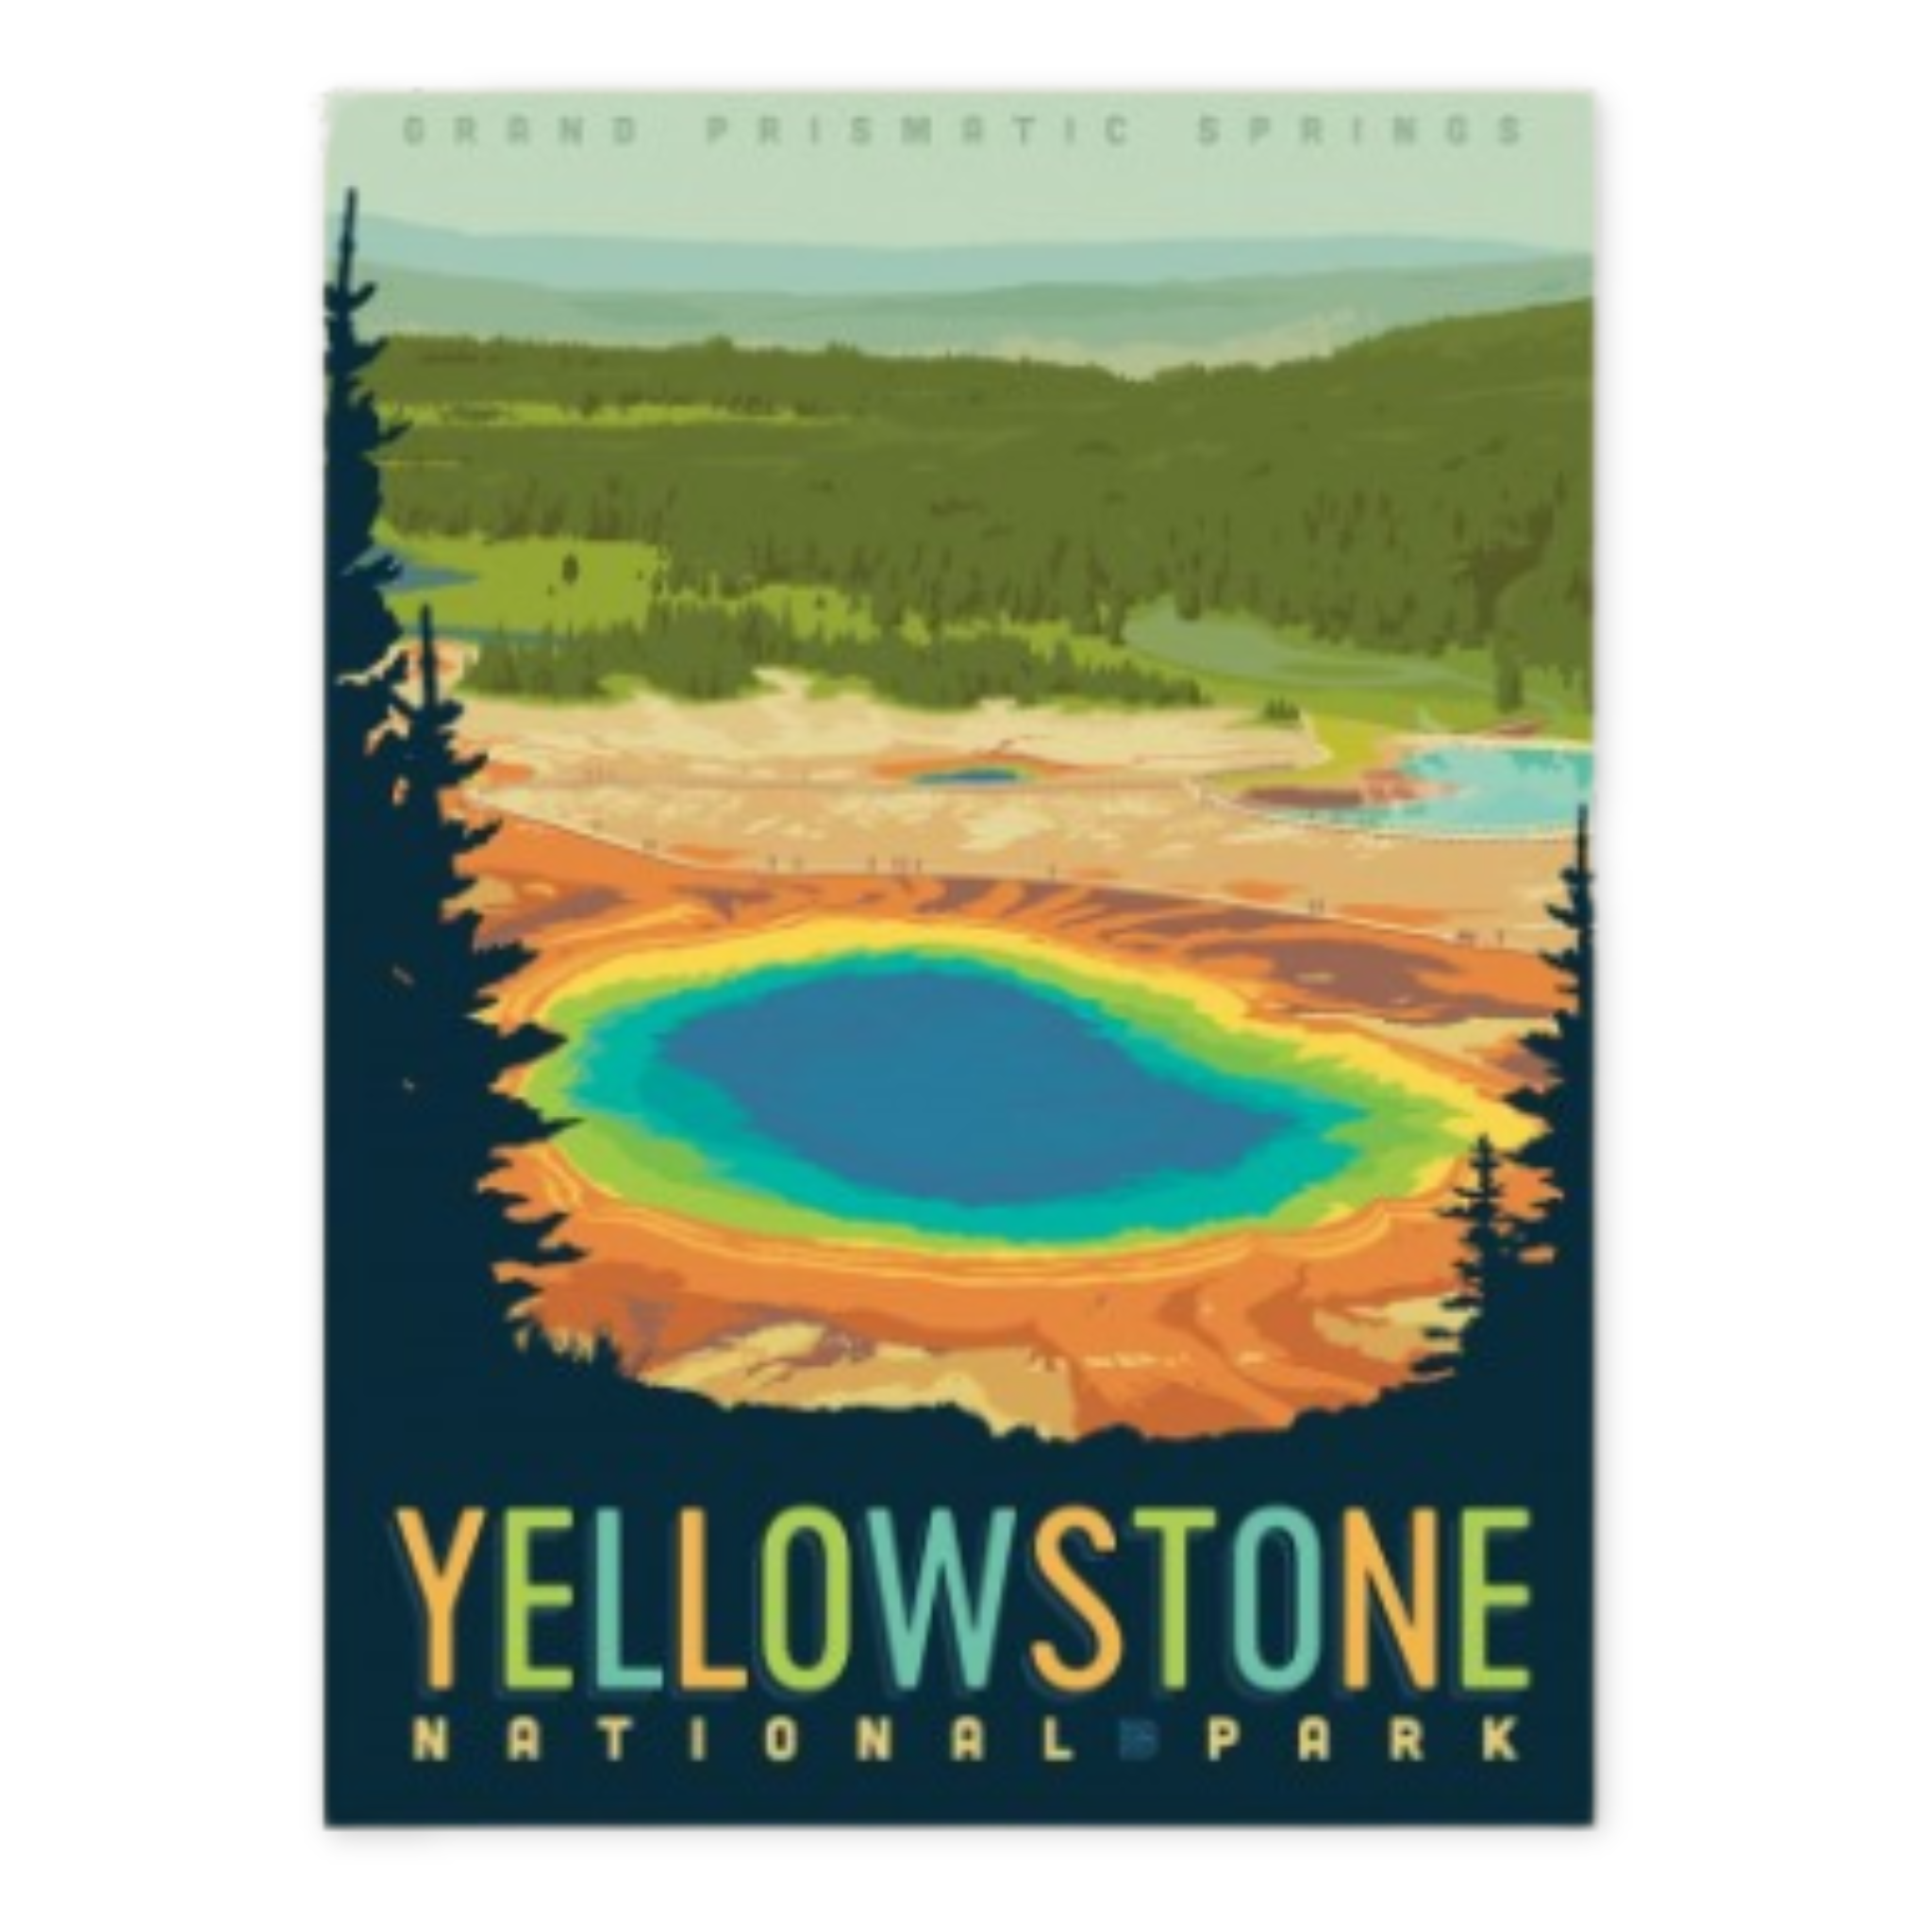 print of yellowstone national park with image of the grand prismatic springs 